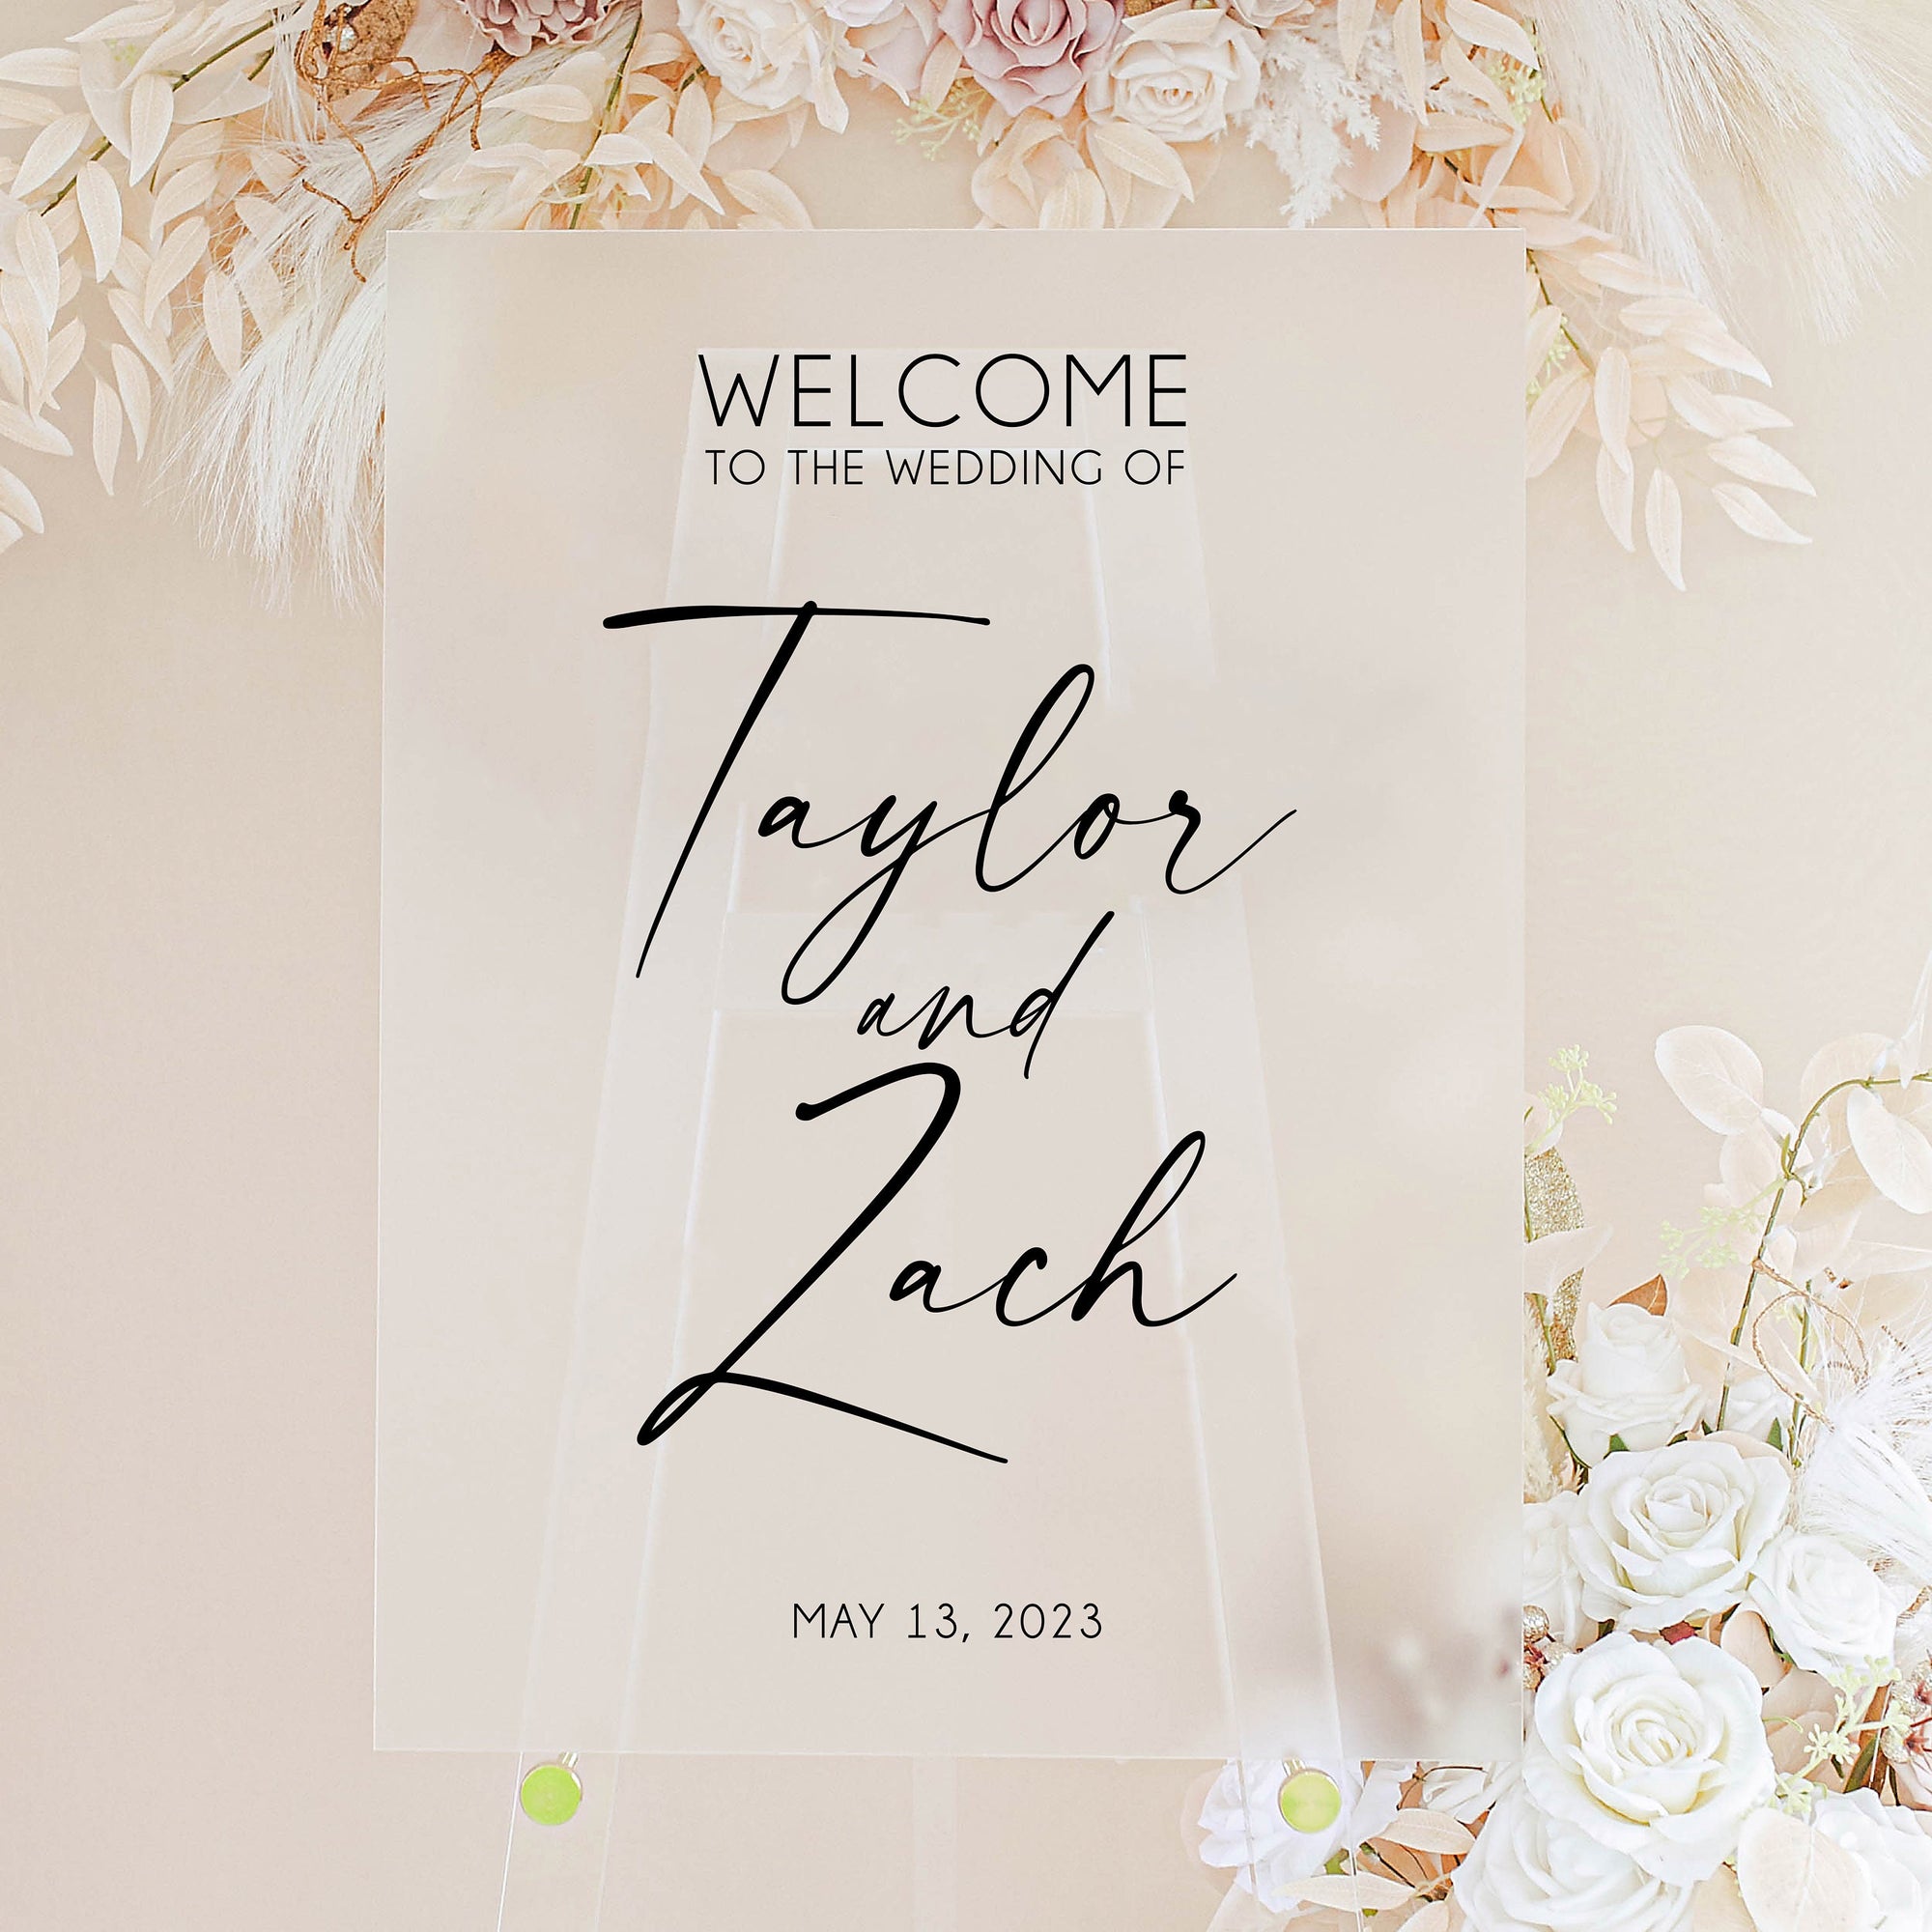 Specialty Colors Dusty Blue, Blush, Frosted, Black, Mauve Acrylic Wedding Welcome Sign, Signature Modern Font Wedding Reception Sign